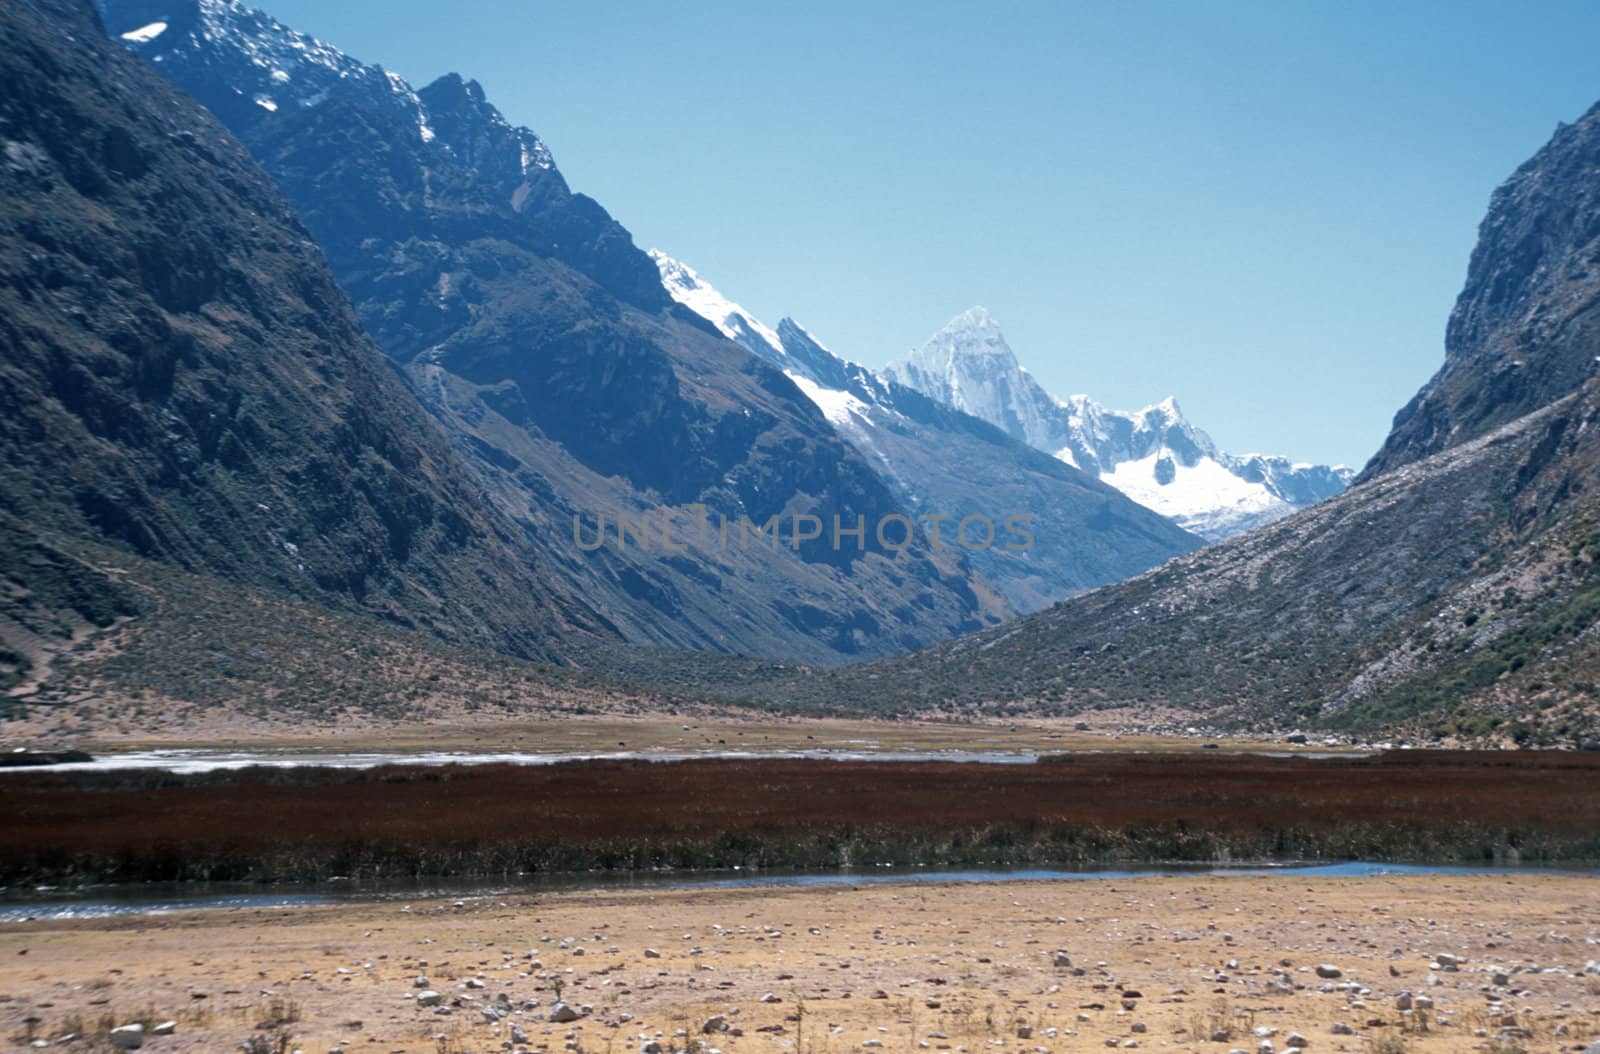 Huge snowy Andes Mountains in Peru viewed from a beautiful valley